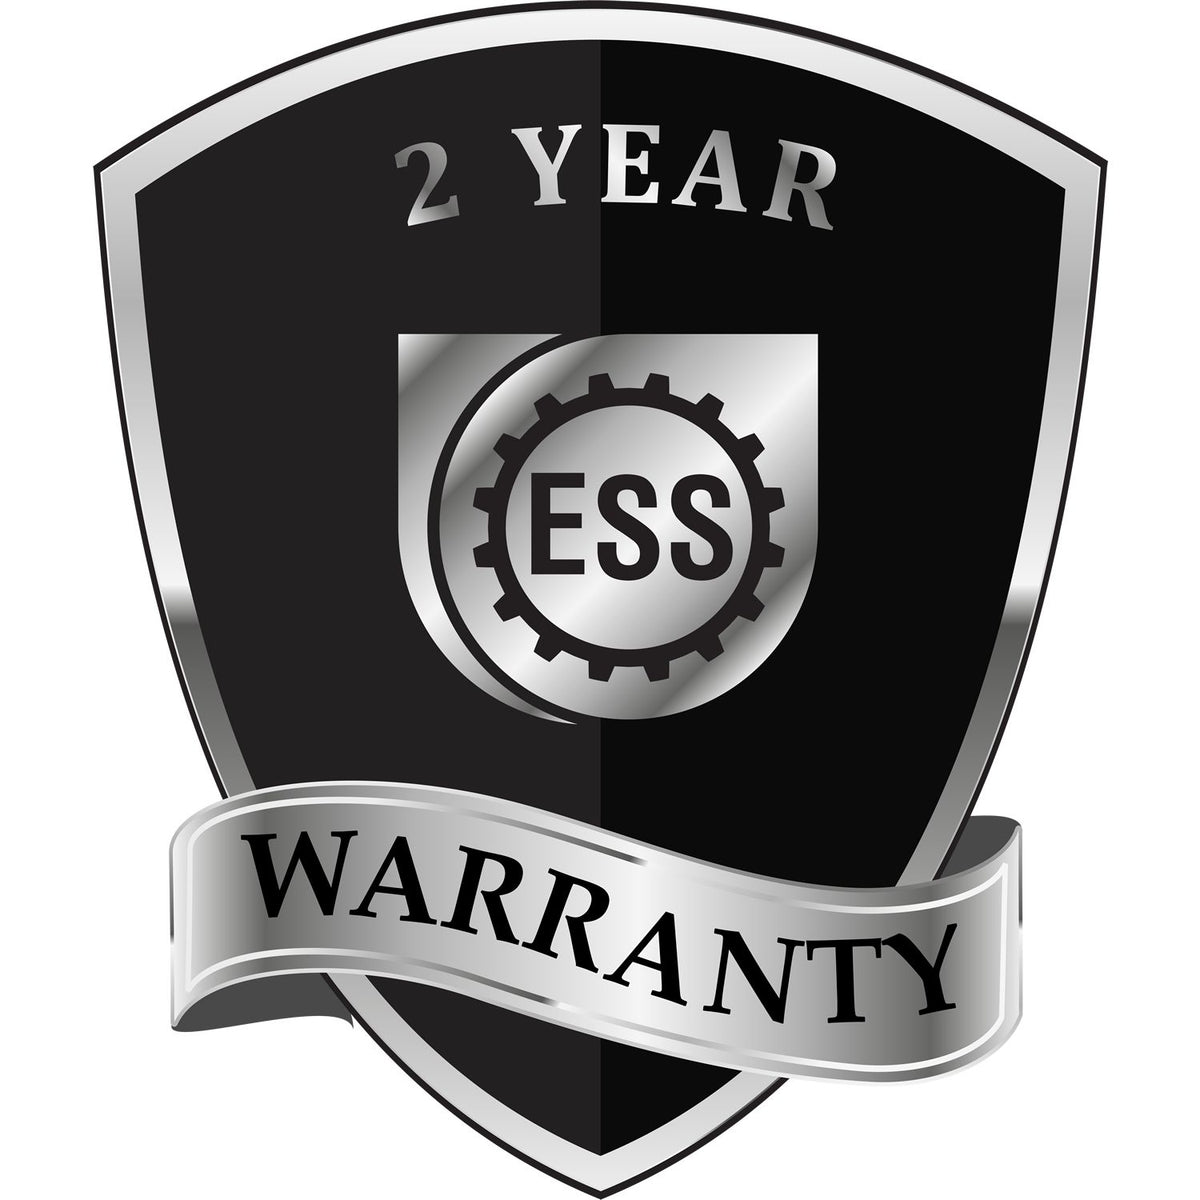 A badge or emblem showing a warranty icon for the Extended Long Reach Minnesota Architect Seal Embosser